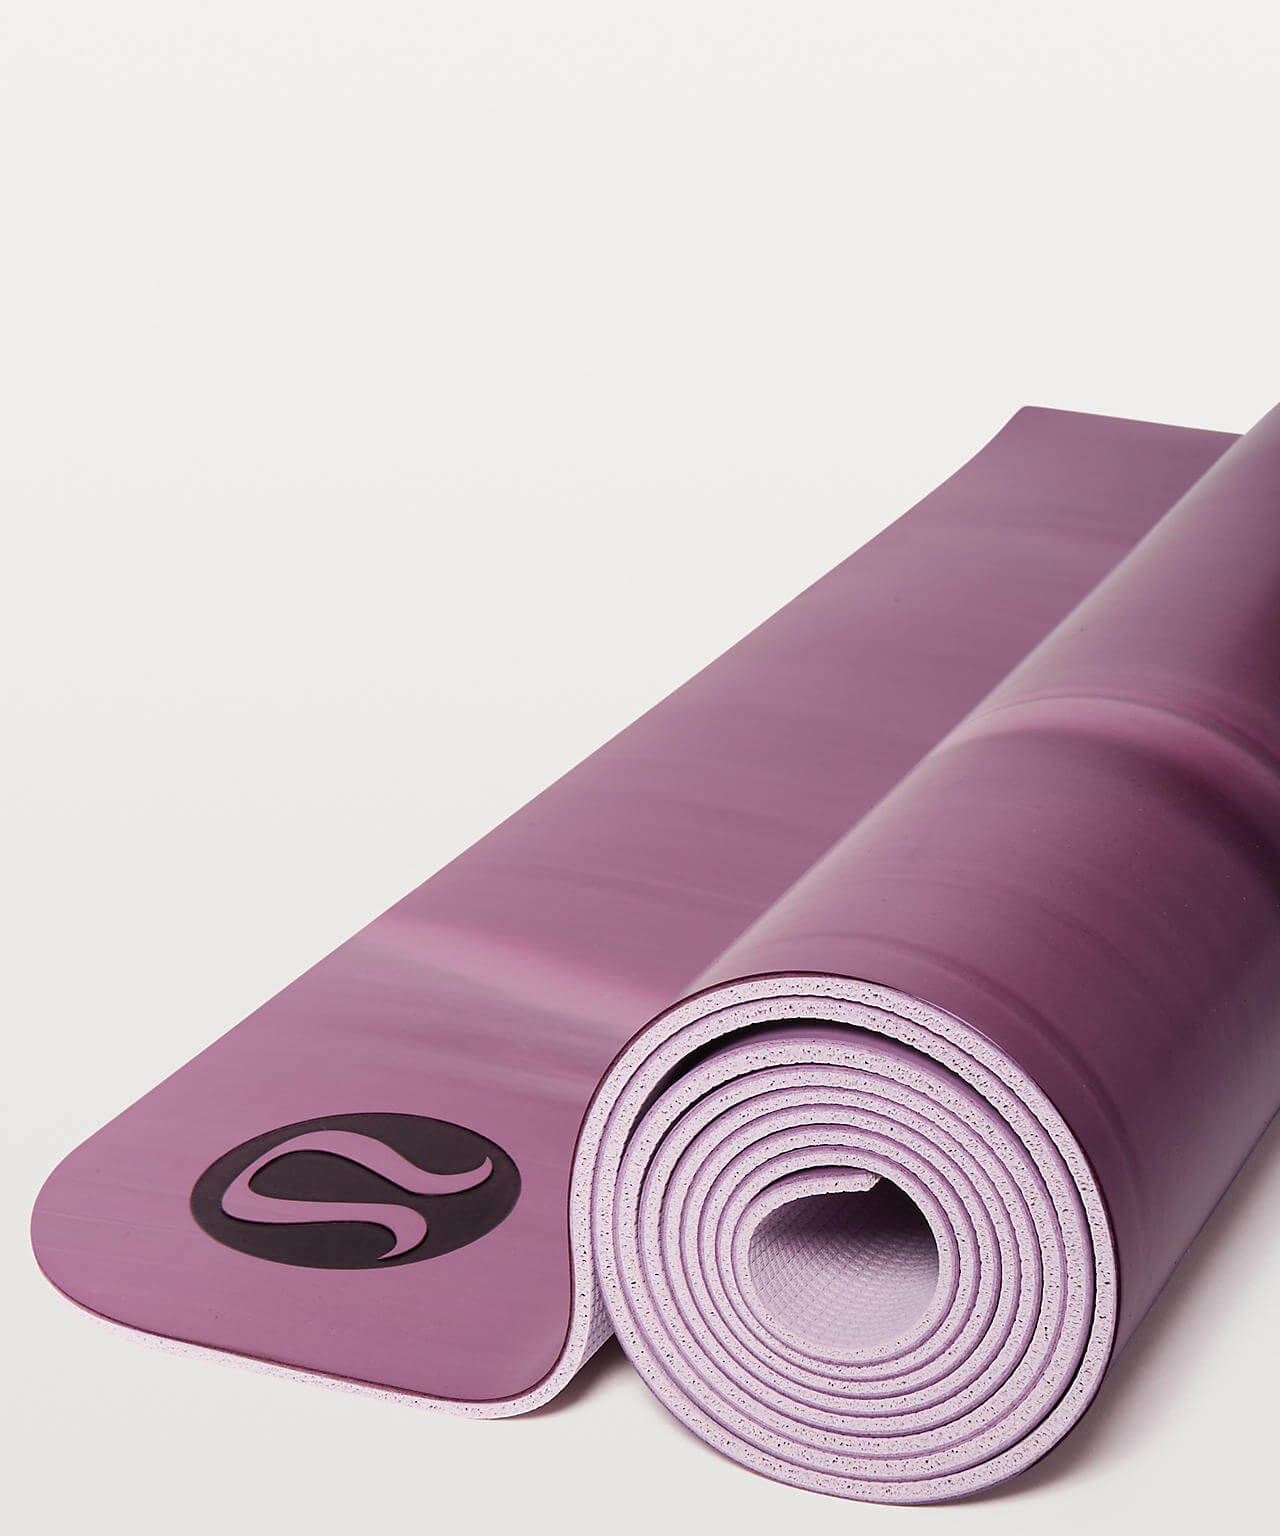 The best lululemon yoga clothing, mats, bags and more for 2022